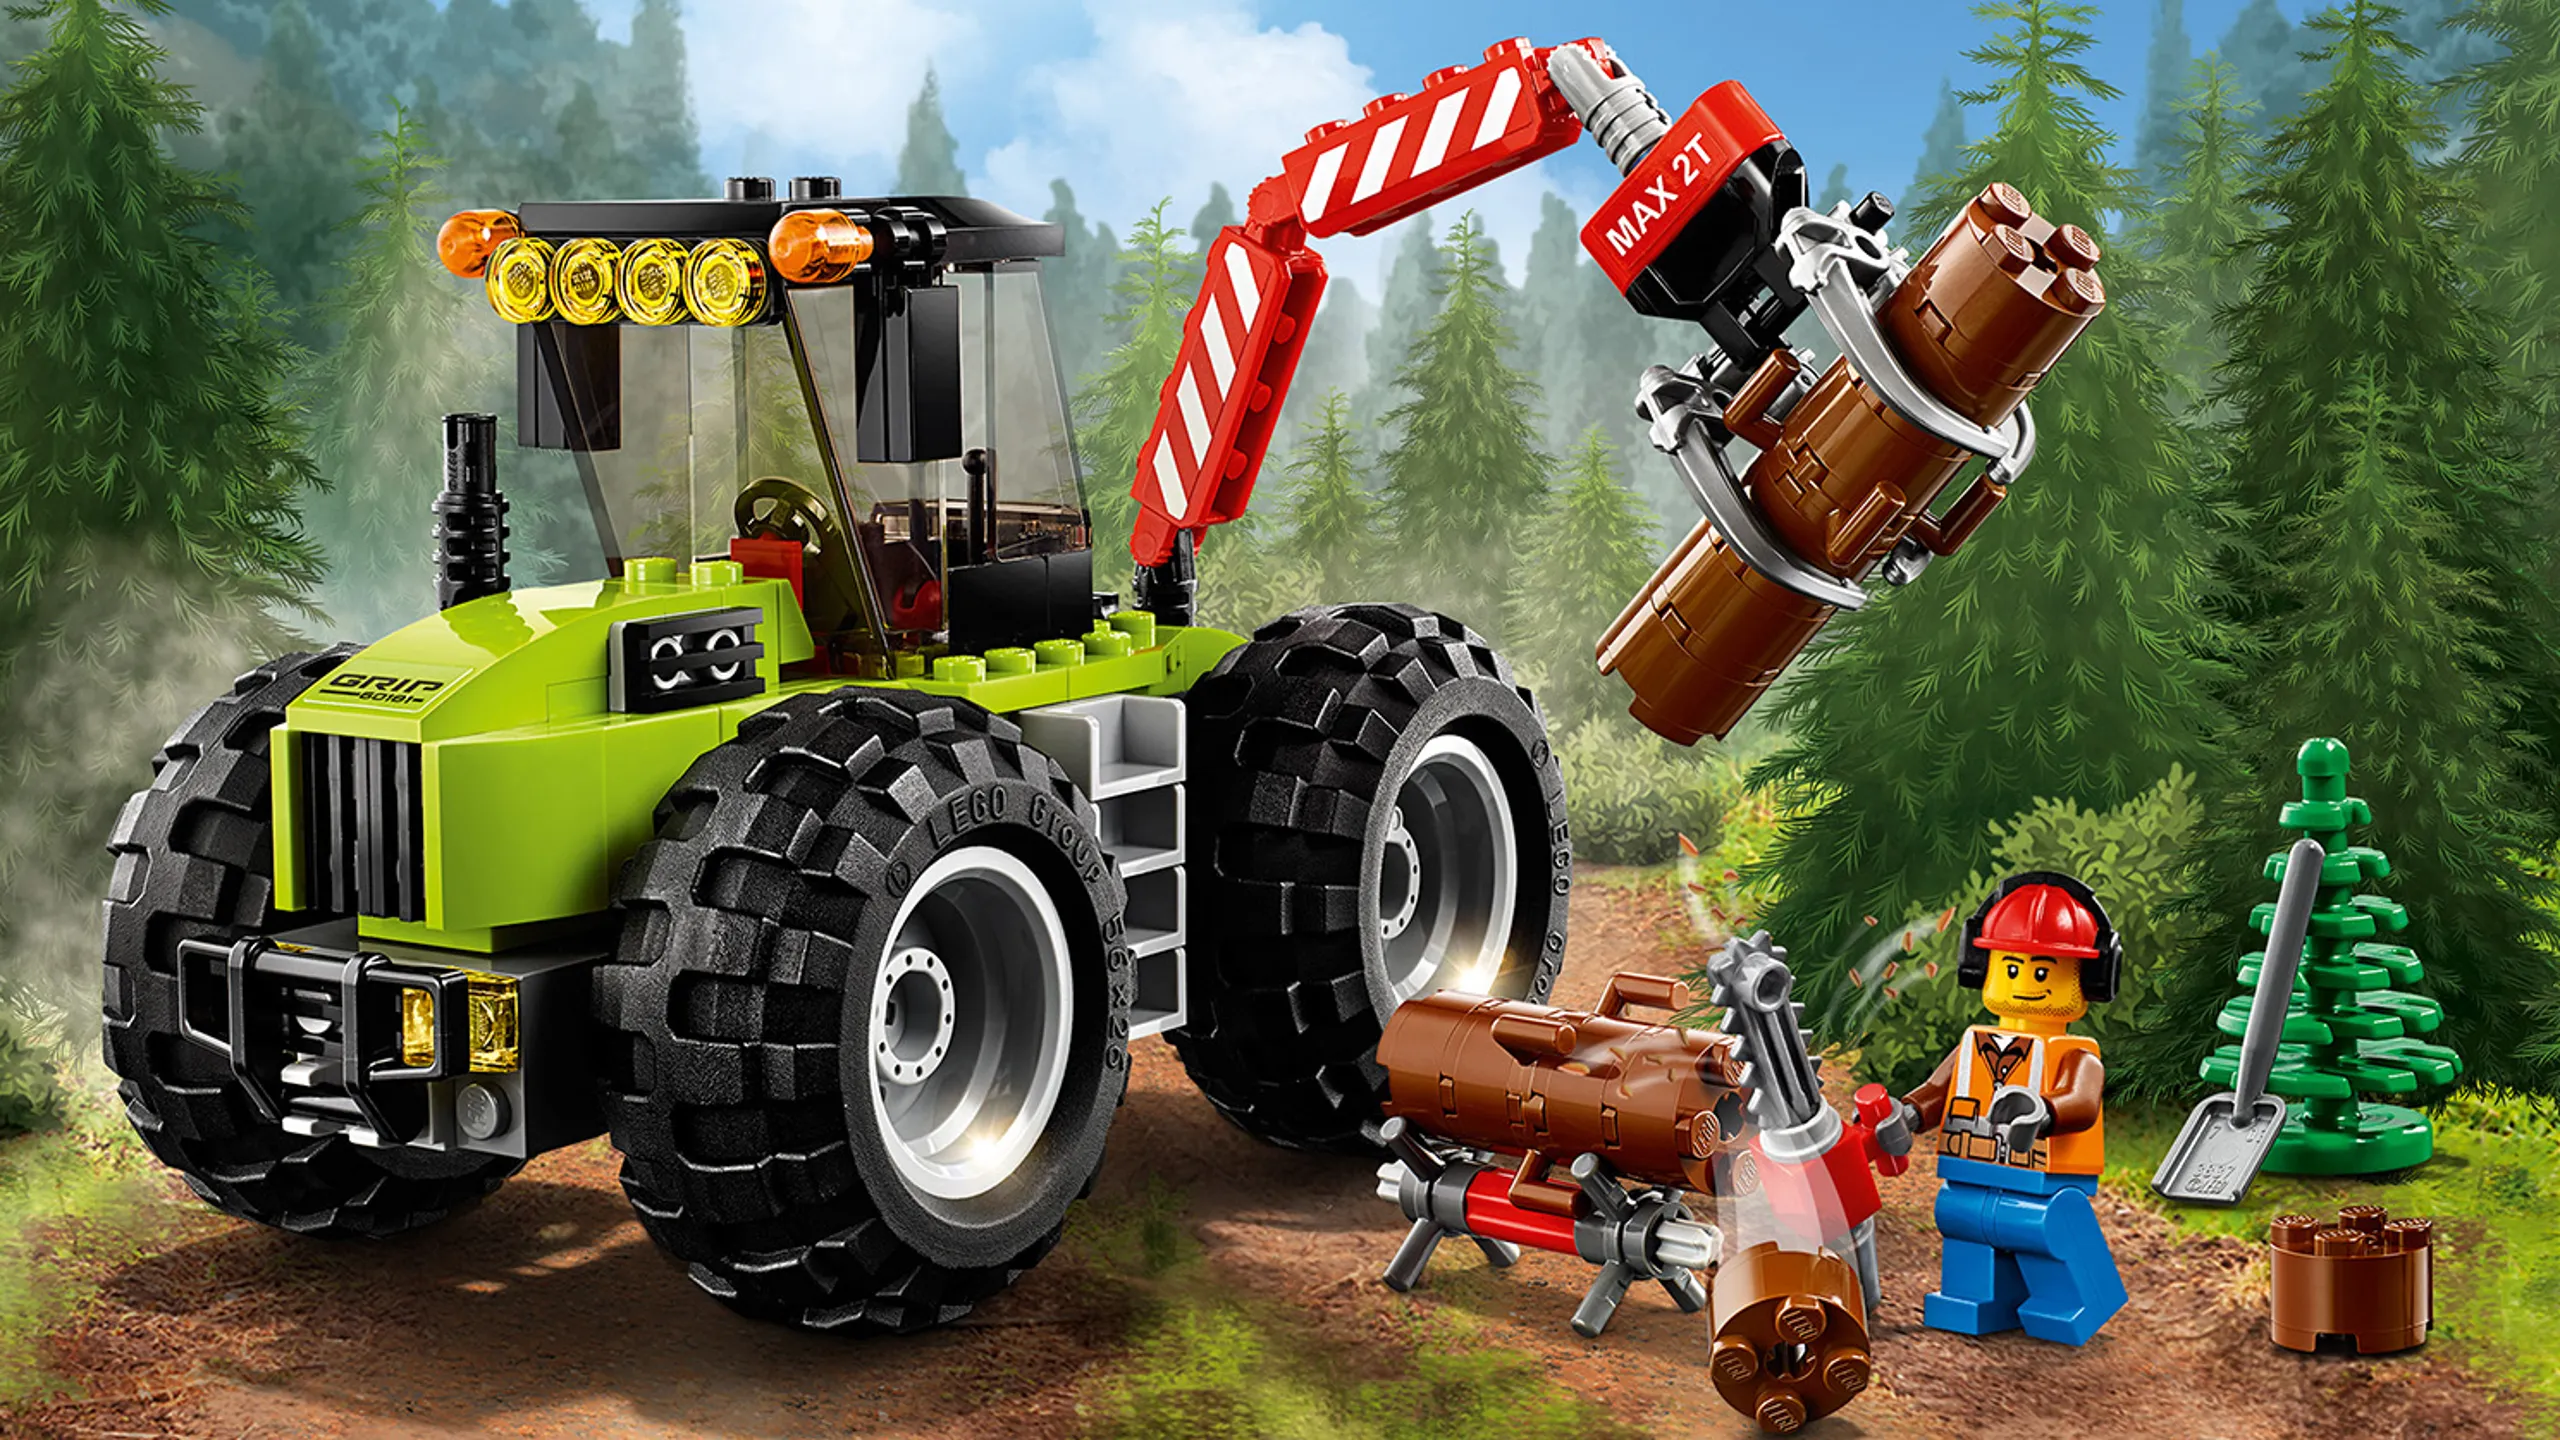 LEGO City Great Vehicles - 60181 Forest Tractor - Use the tractor to help the forest worker lift big logs of wood.